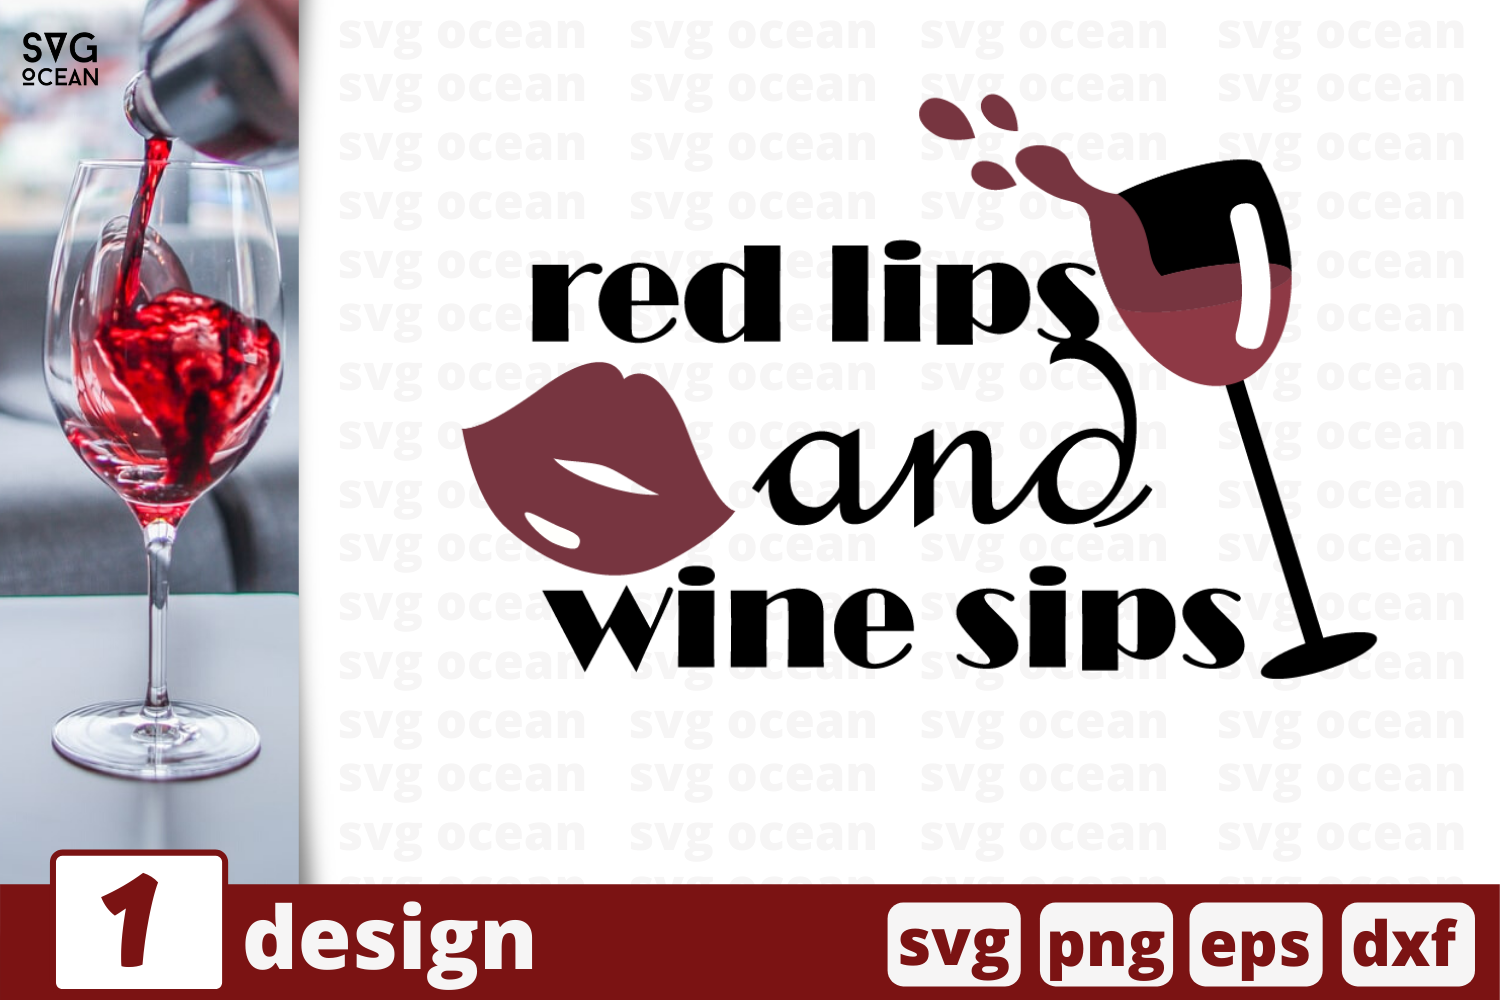 Download 1 RED LIPS svg bundle, quotes cricut svg By SvgOcean | TheHungryJPEG.com